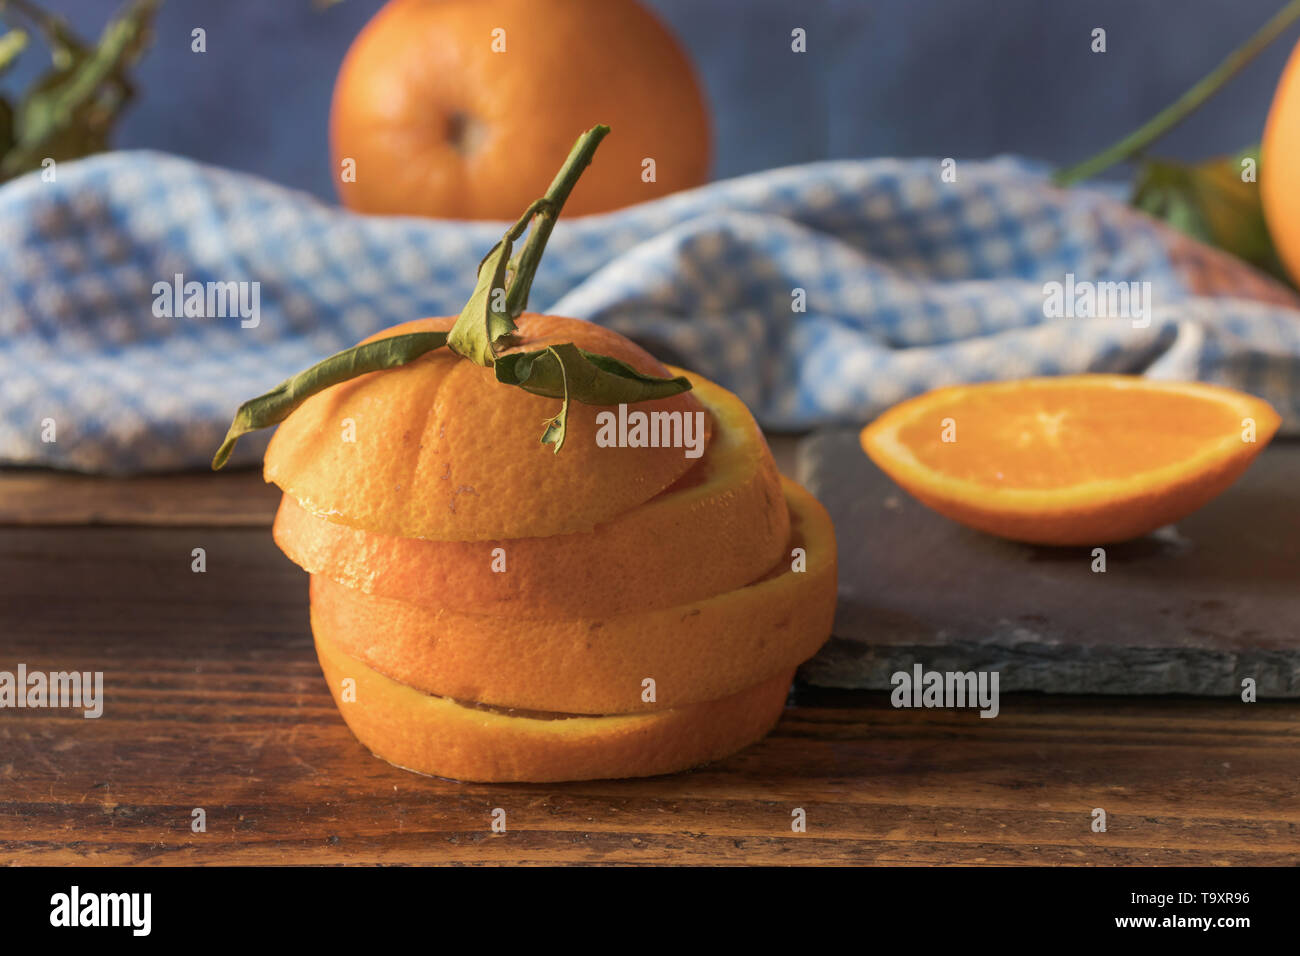 Fresh orange cut into slices on a wooden table. Front view Stock Photo